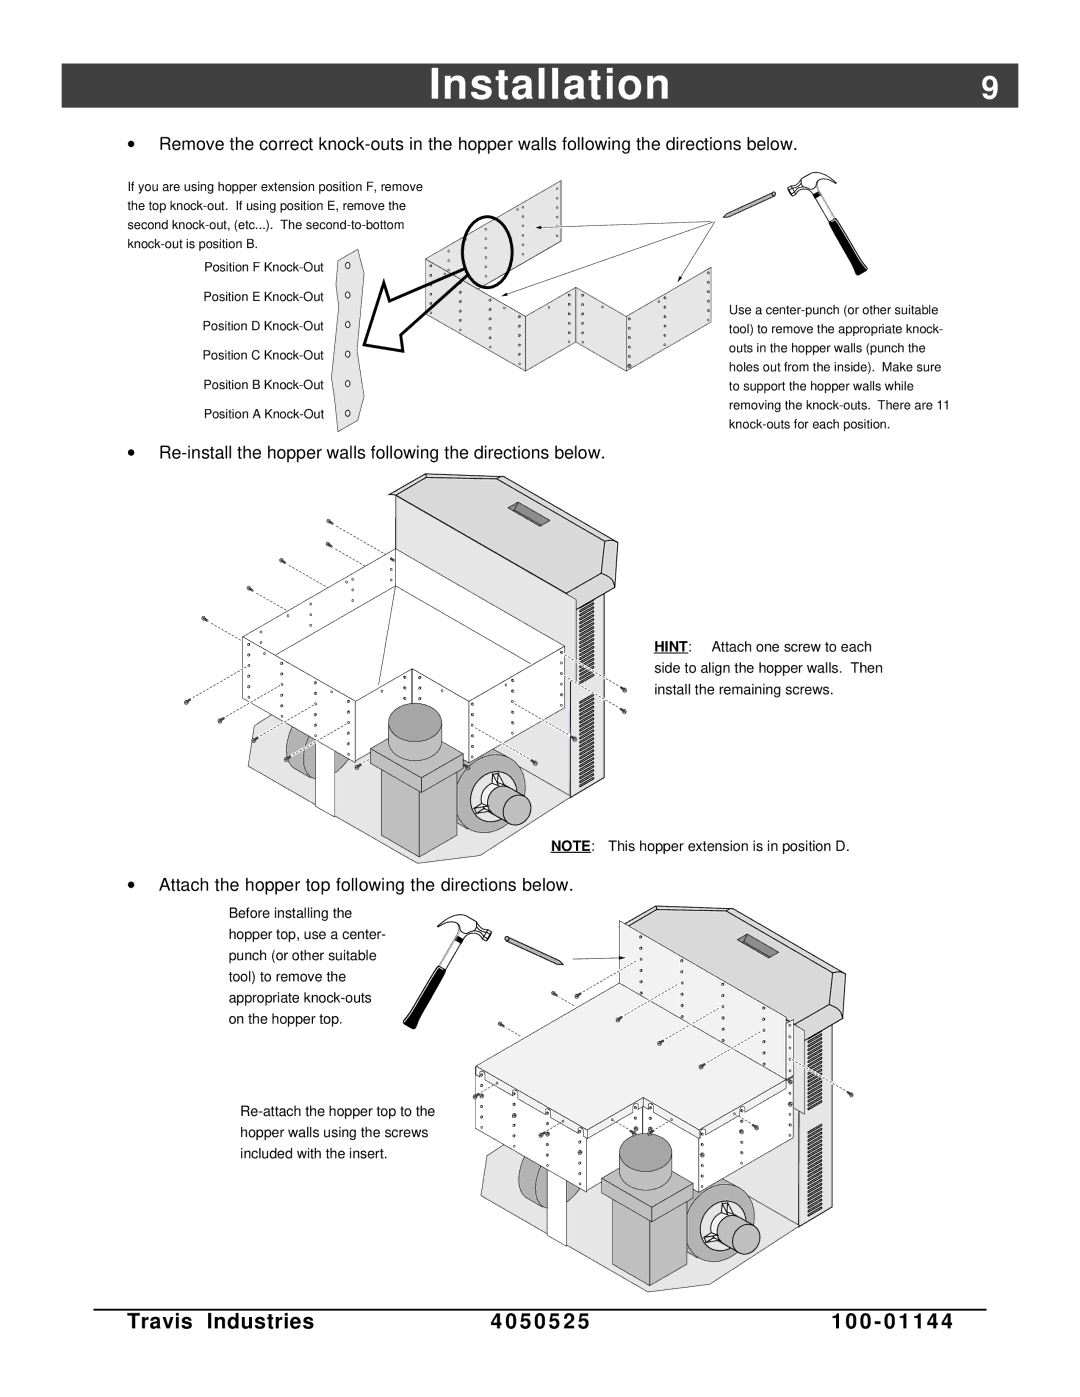 Avalon Stoves Indoor Fireplace manual Installation9, Re-install the hopper walls following the directions below 